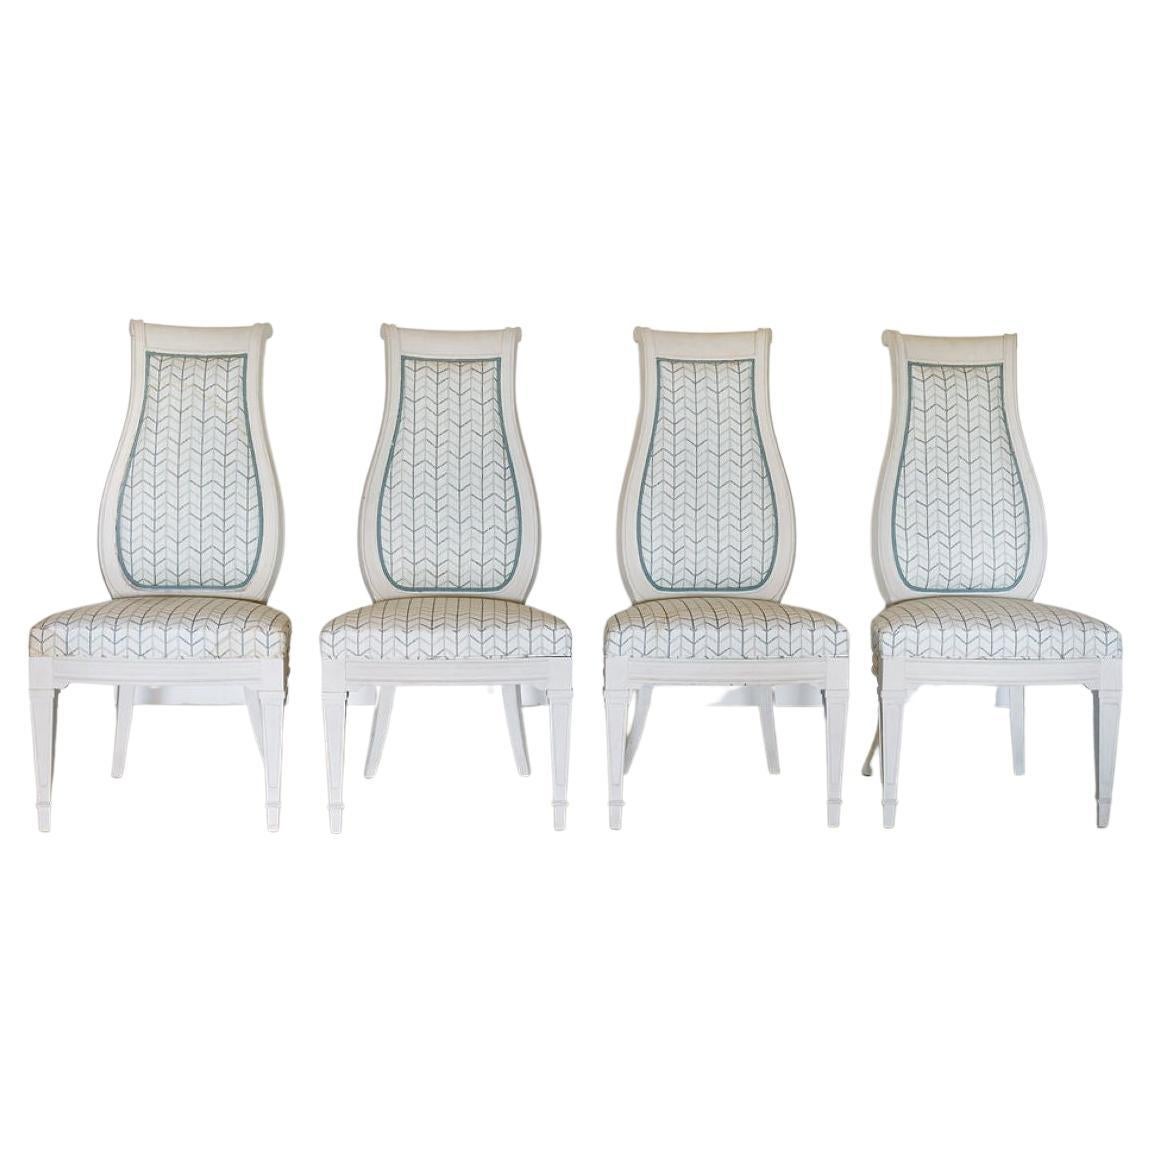 Set of Four Italian Chalky White Painted Carver Chair, 1960s